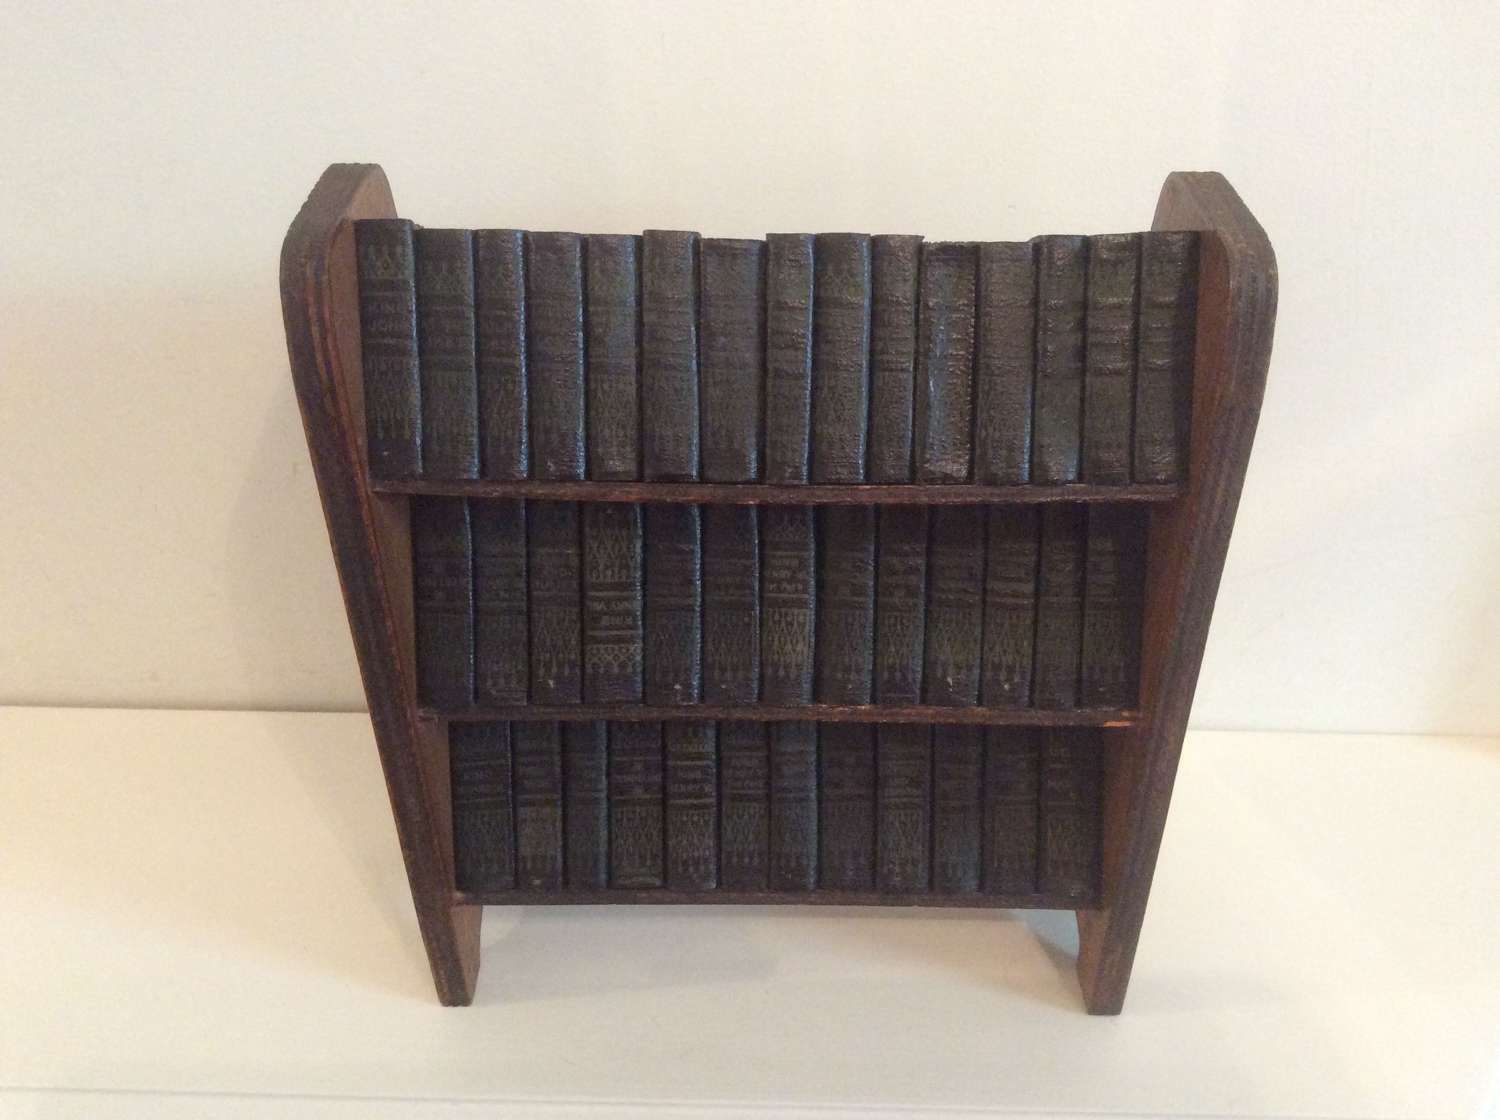 Miniature Complete Works of Shakespeare in Bookcase